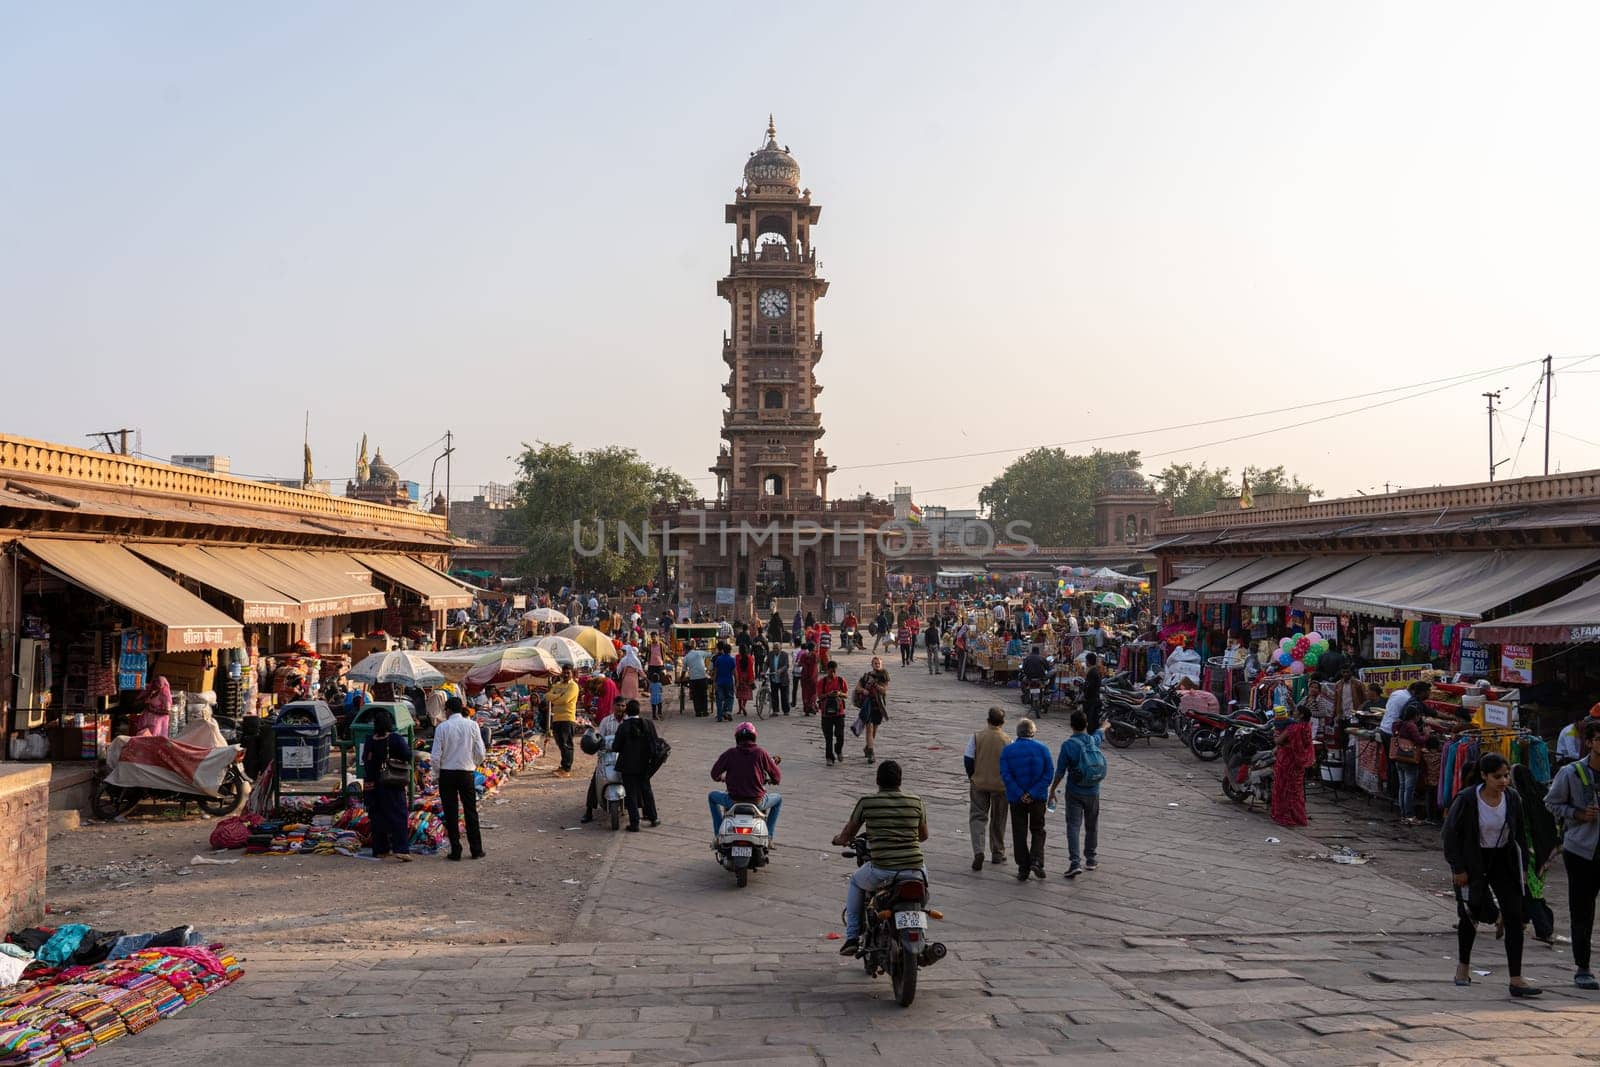 Jodhpur, India - Decembe 8, 2019: The clock tower and people at Sardar Market in the historic city centre.